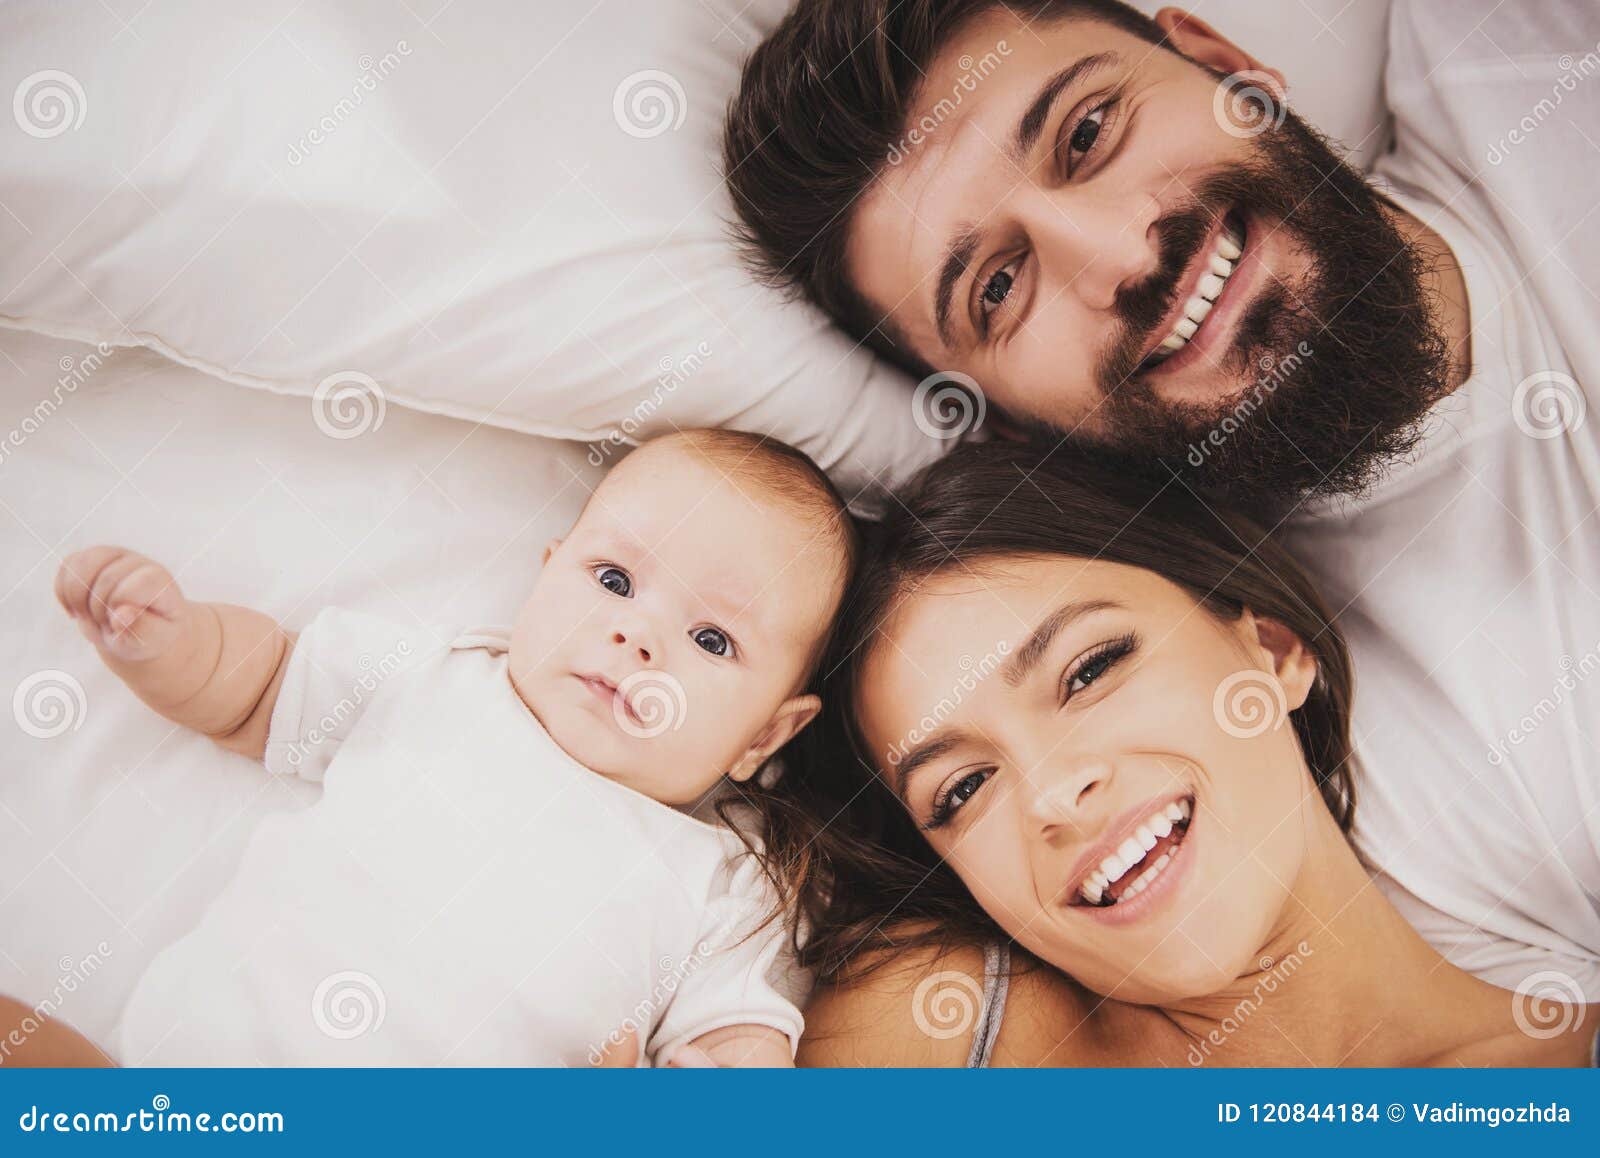 Top View. Mother and Father with Baby in Bed Stock Photo - Image ...